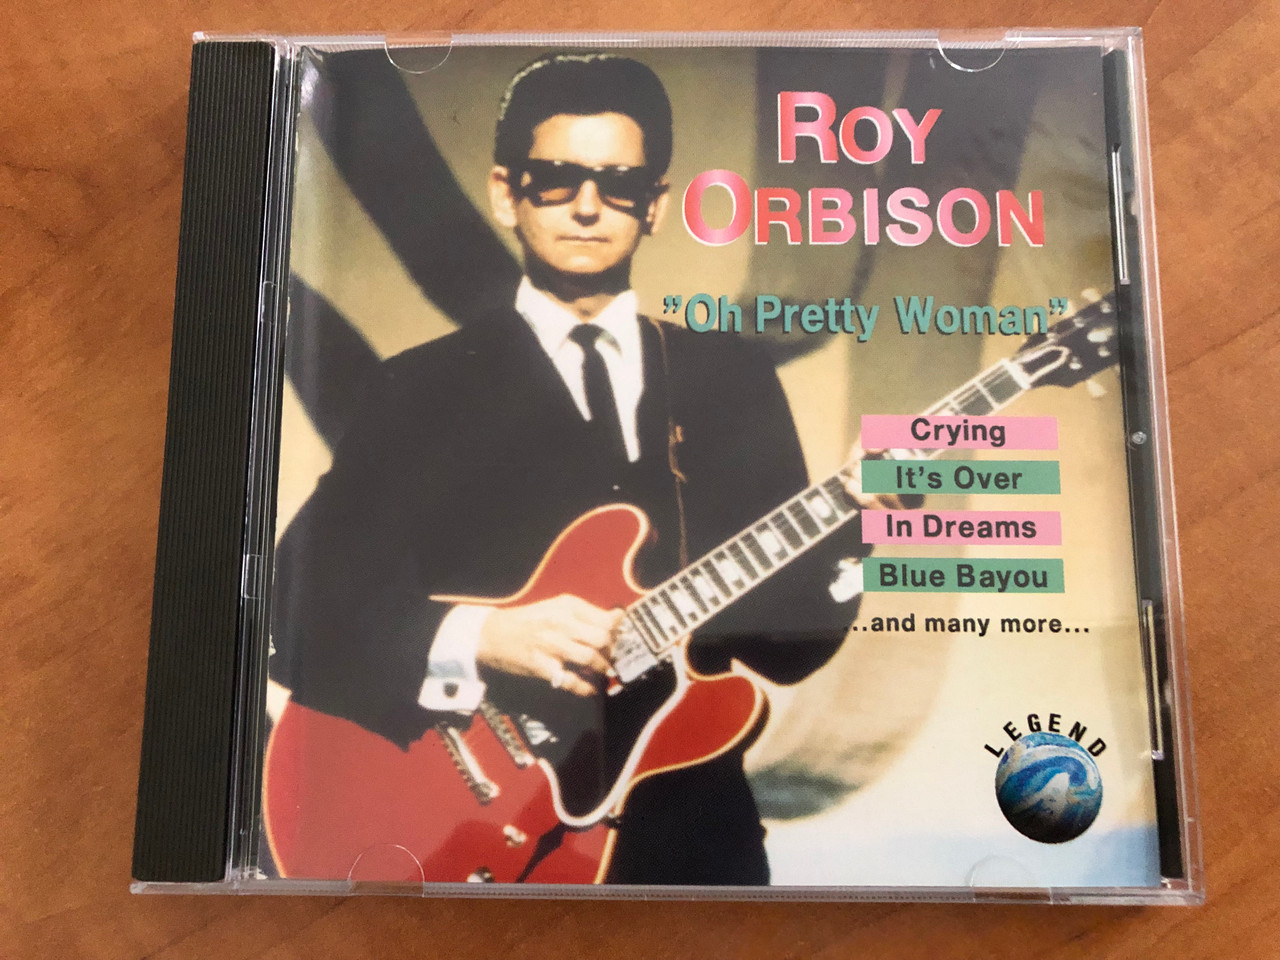 https://cdn10.bigcommerce.com/s-62bdpkt7pb/products/30796/images/181818/Roy_Orbison_-_Oh_Pretty_Woman_Crying_Its_Over_In_Dreams_Blue_Angel_and_many_more_Legend_Audio_CD_1993_WZ_90042_1__97184.1623931886.1280.1280.JPG?c=2